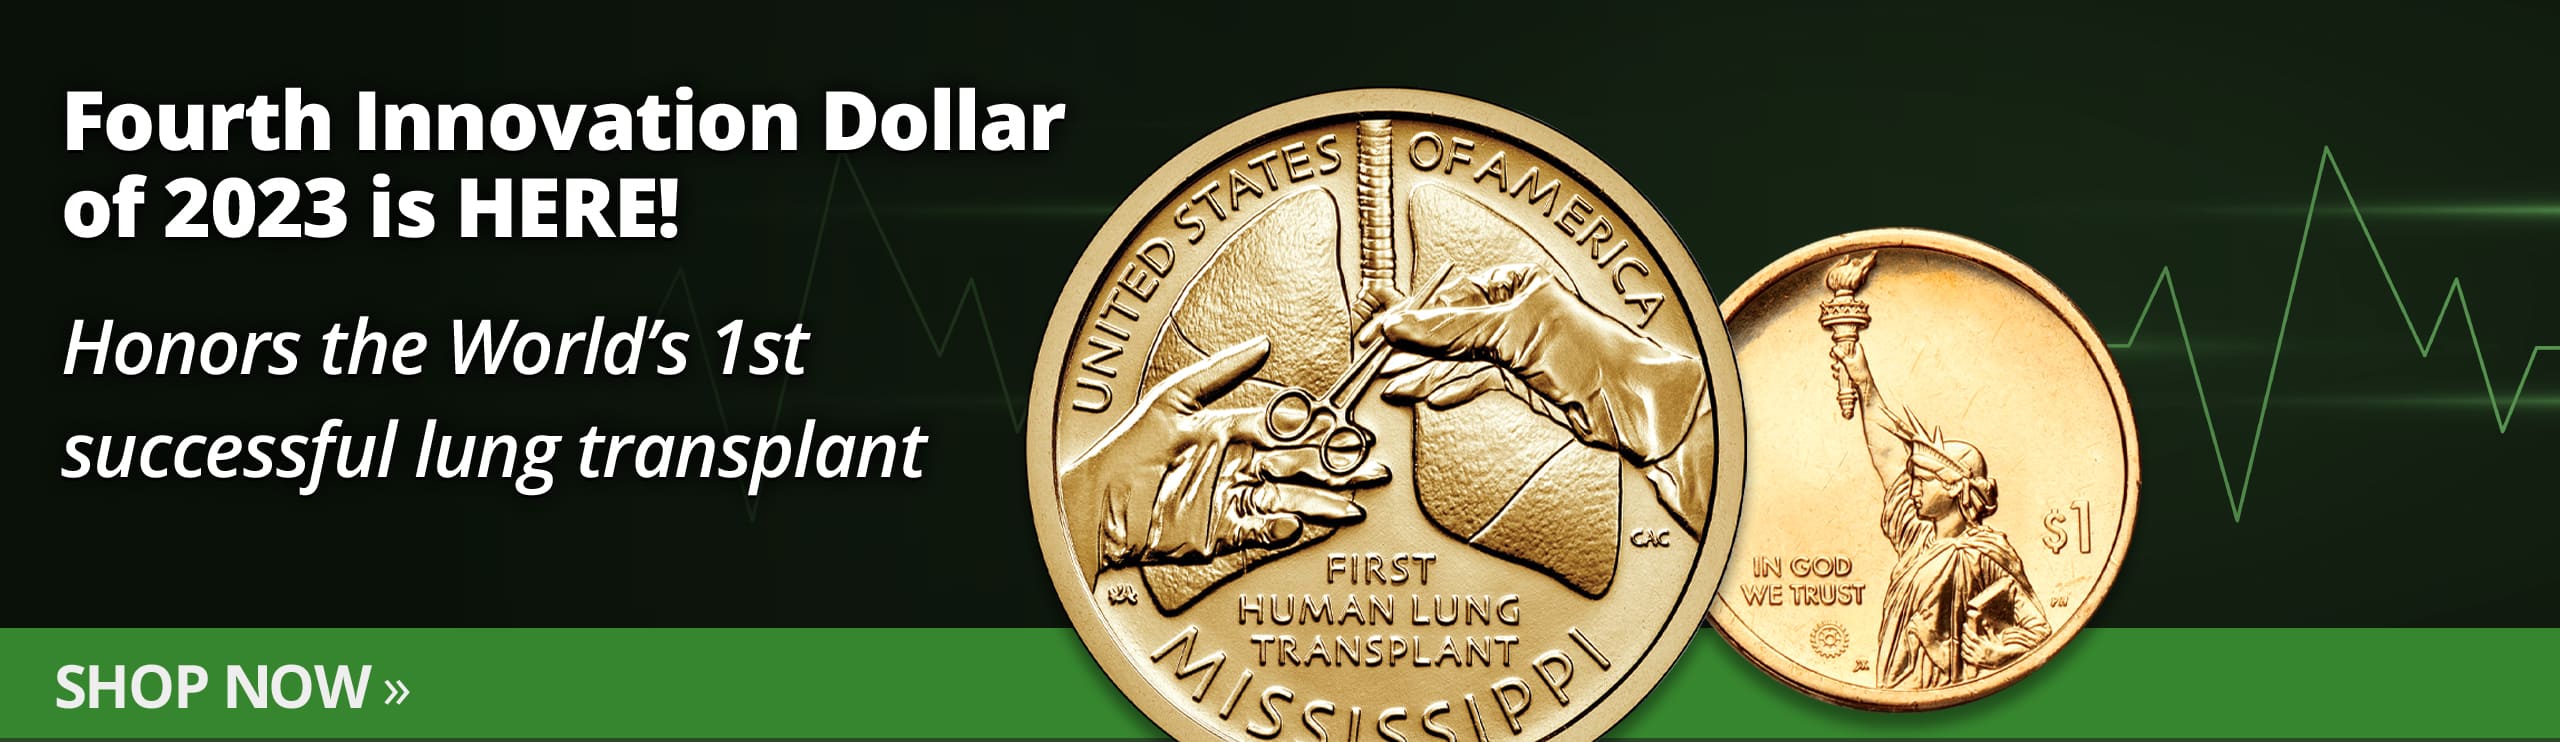 Third Innovation Dollar of 2023 is Here! Honors the Automotive Industry of Mississippi - Shop Now